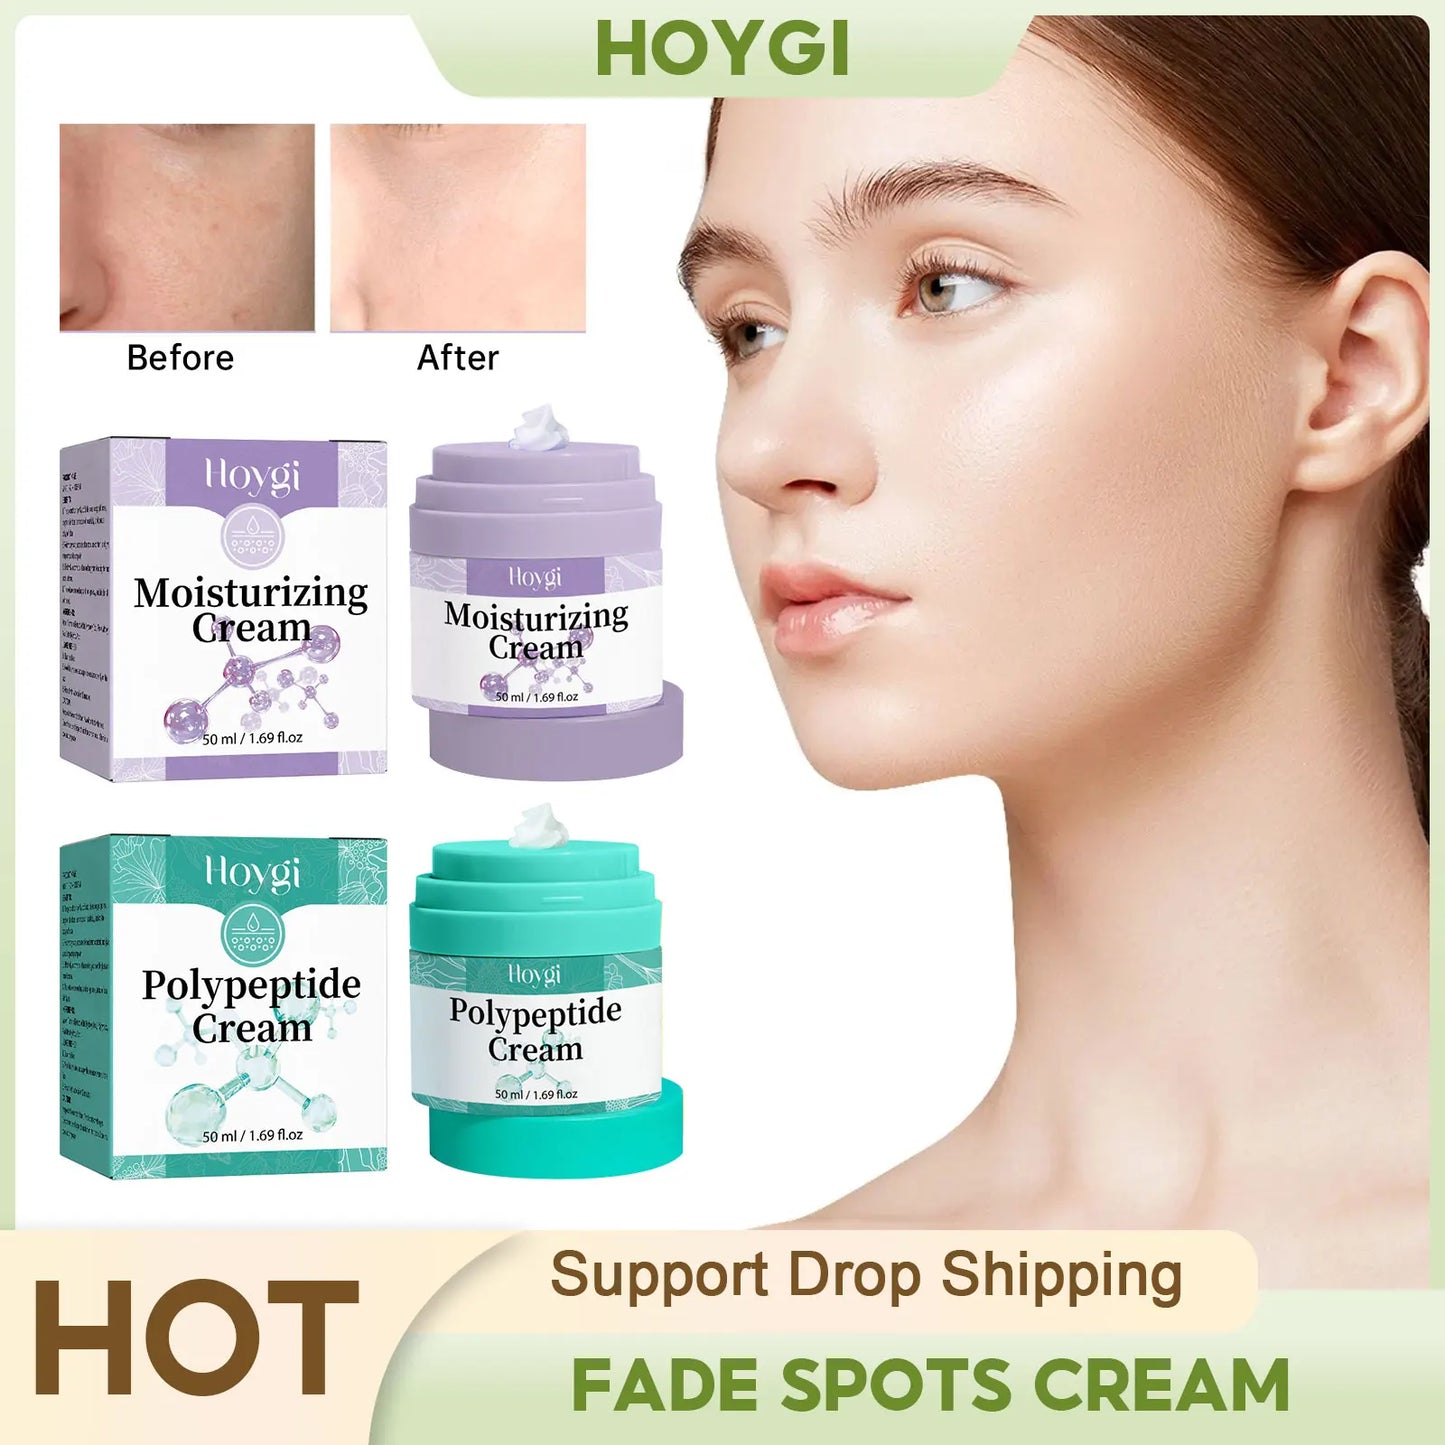 Fade Spots Cream Lightening Fine Lines Anti-Aging Oil Control Shrinking Pores Firming Hydrating Whitening Wrinkles Remover Cream